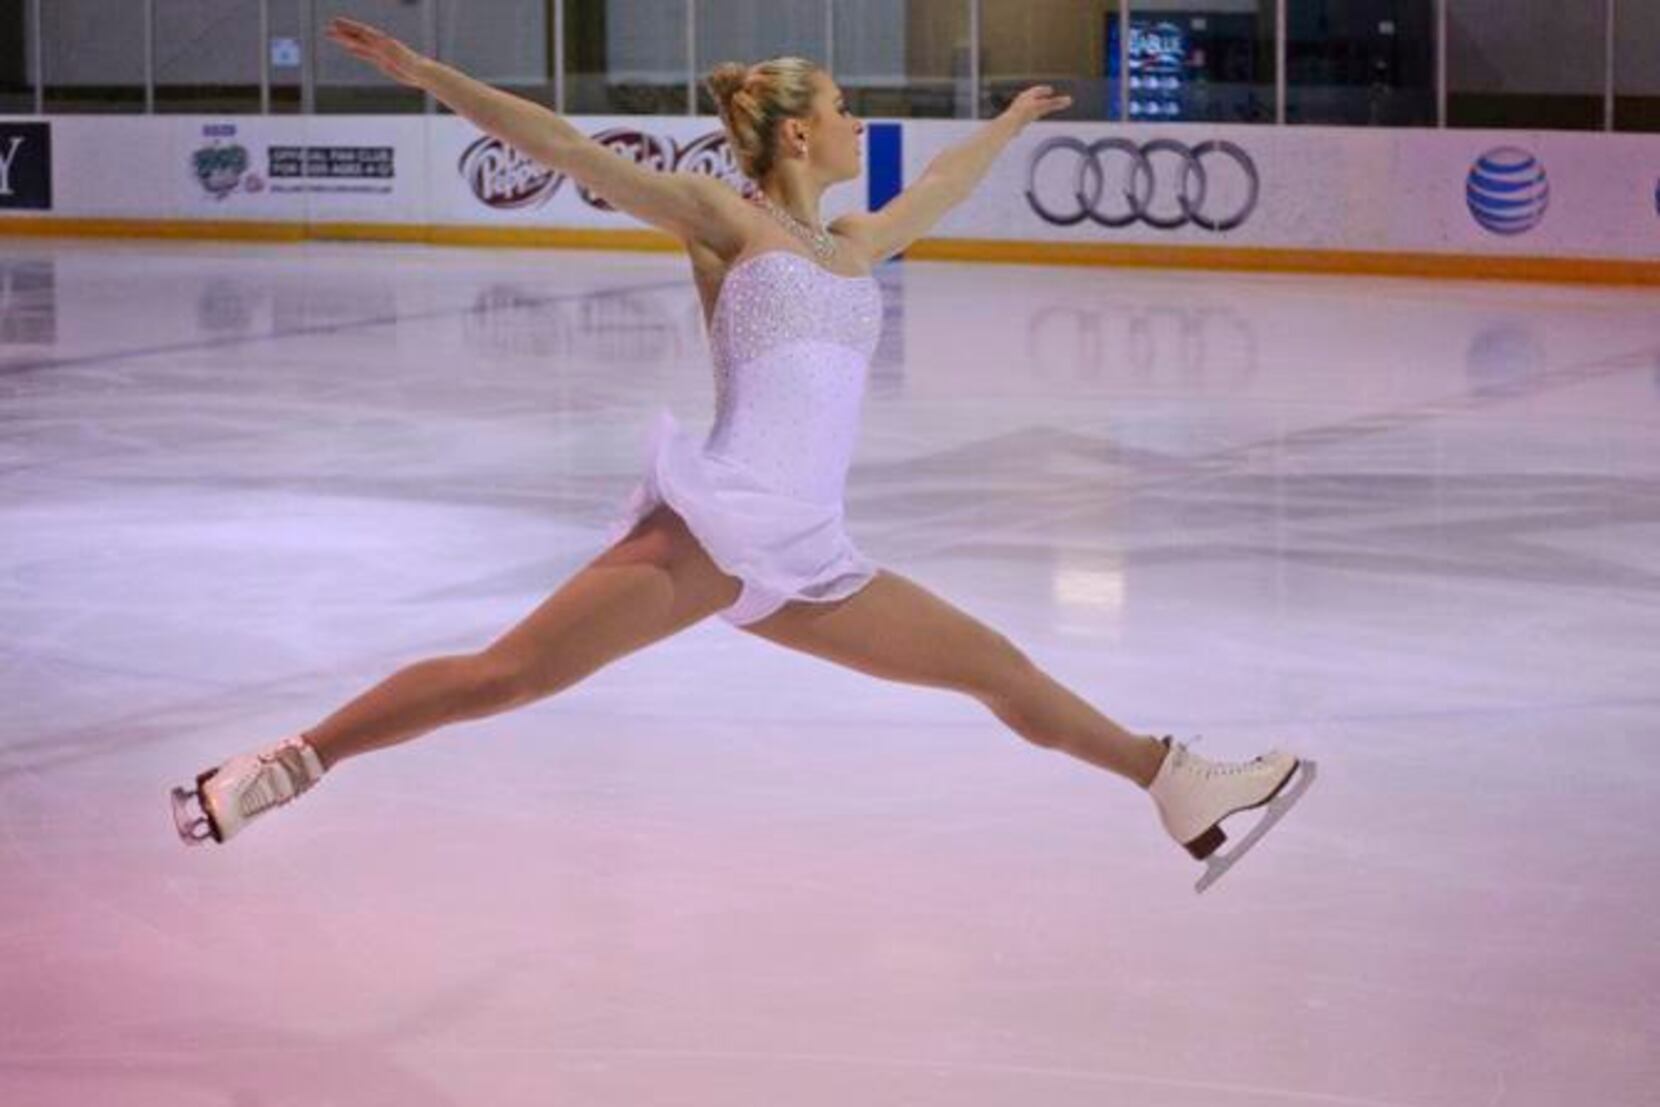 Team energy inspires Canadian figure skaters as they look ahead to